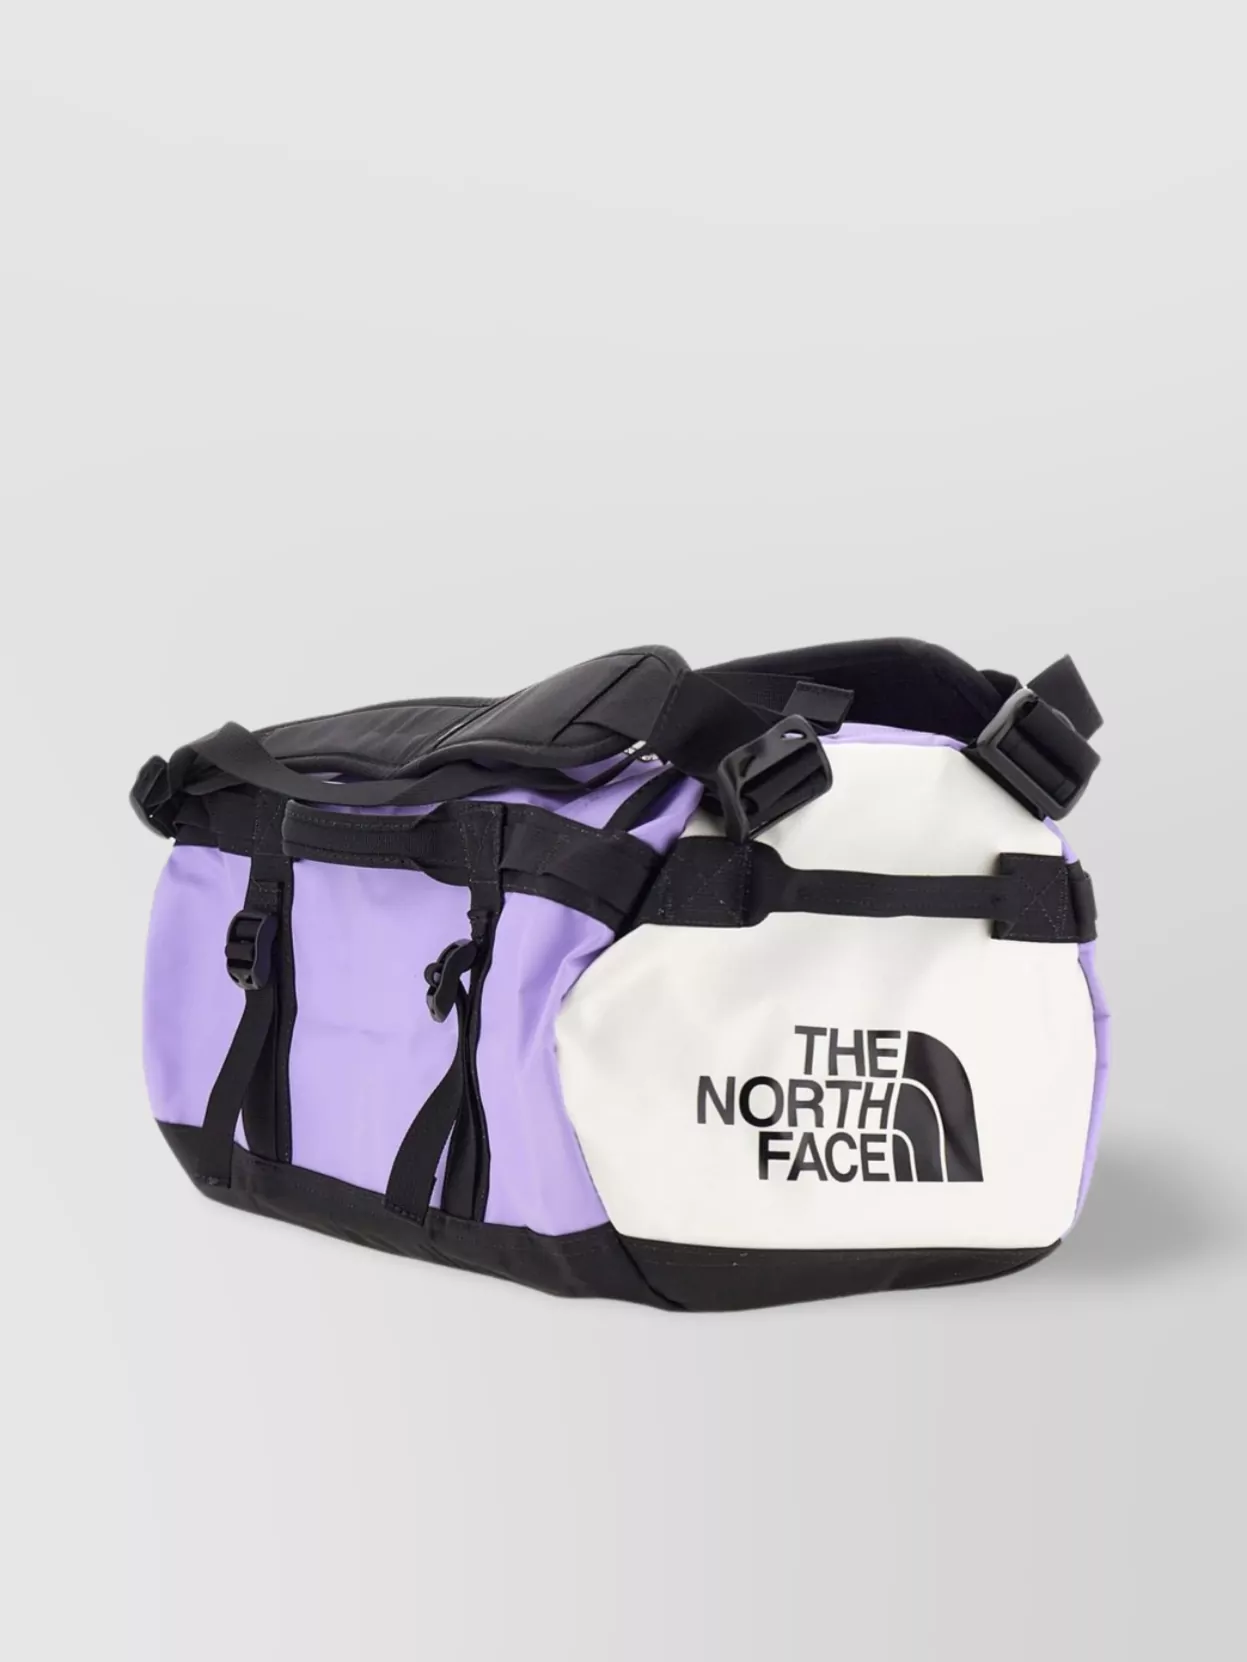 Shop The North Face Duffel Bag For Travel